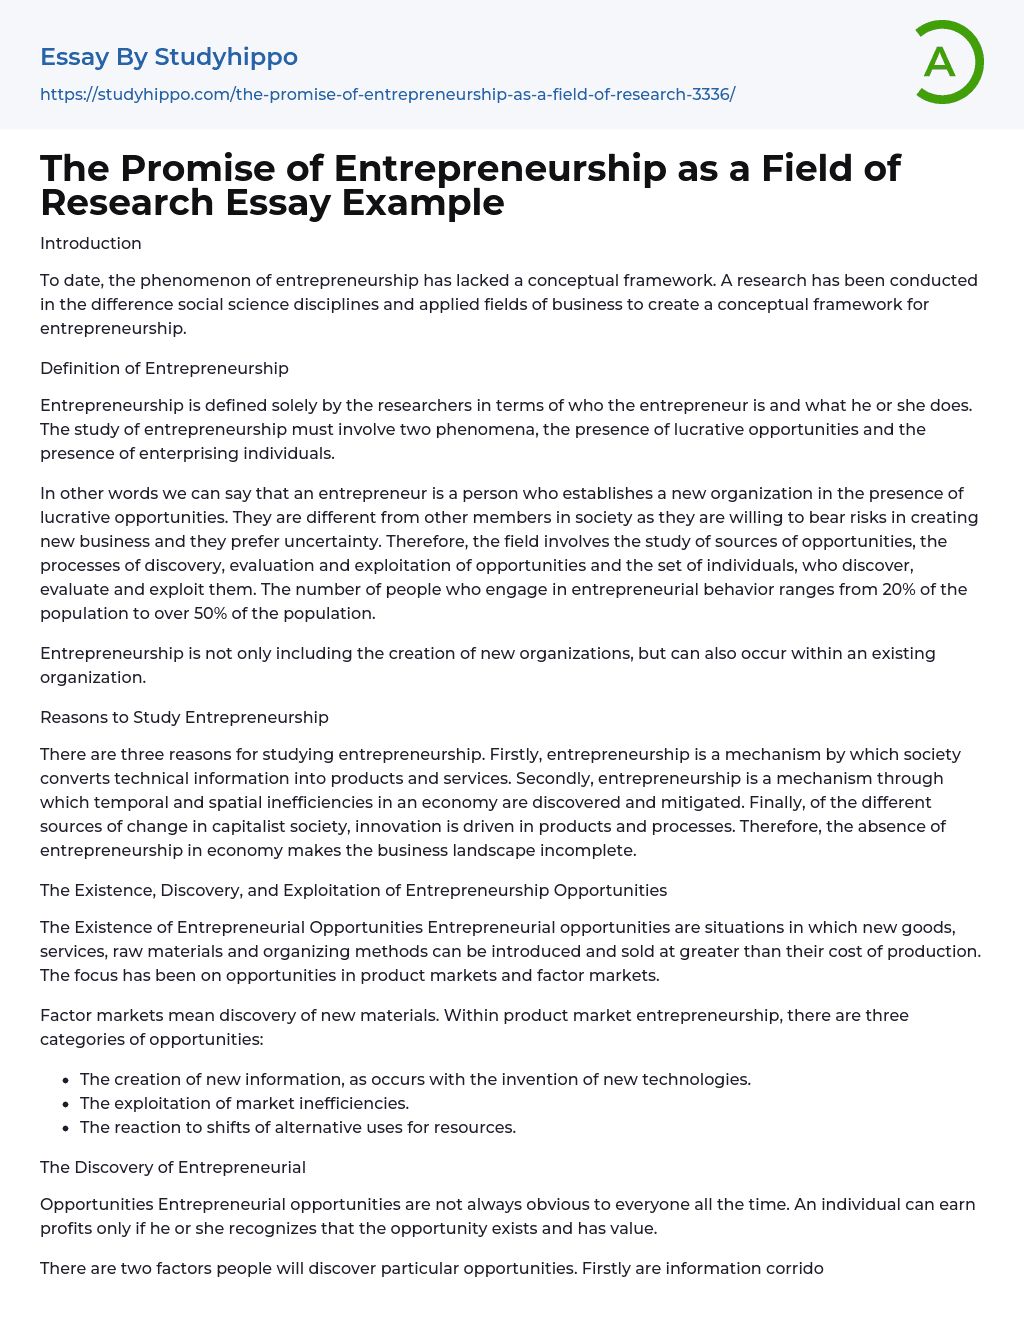 The Promise of Entrepreneurship as a Field of Research Essay Example